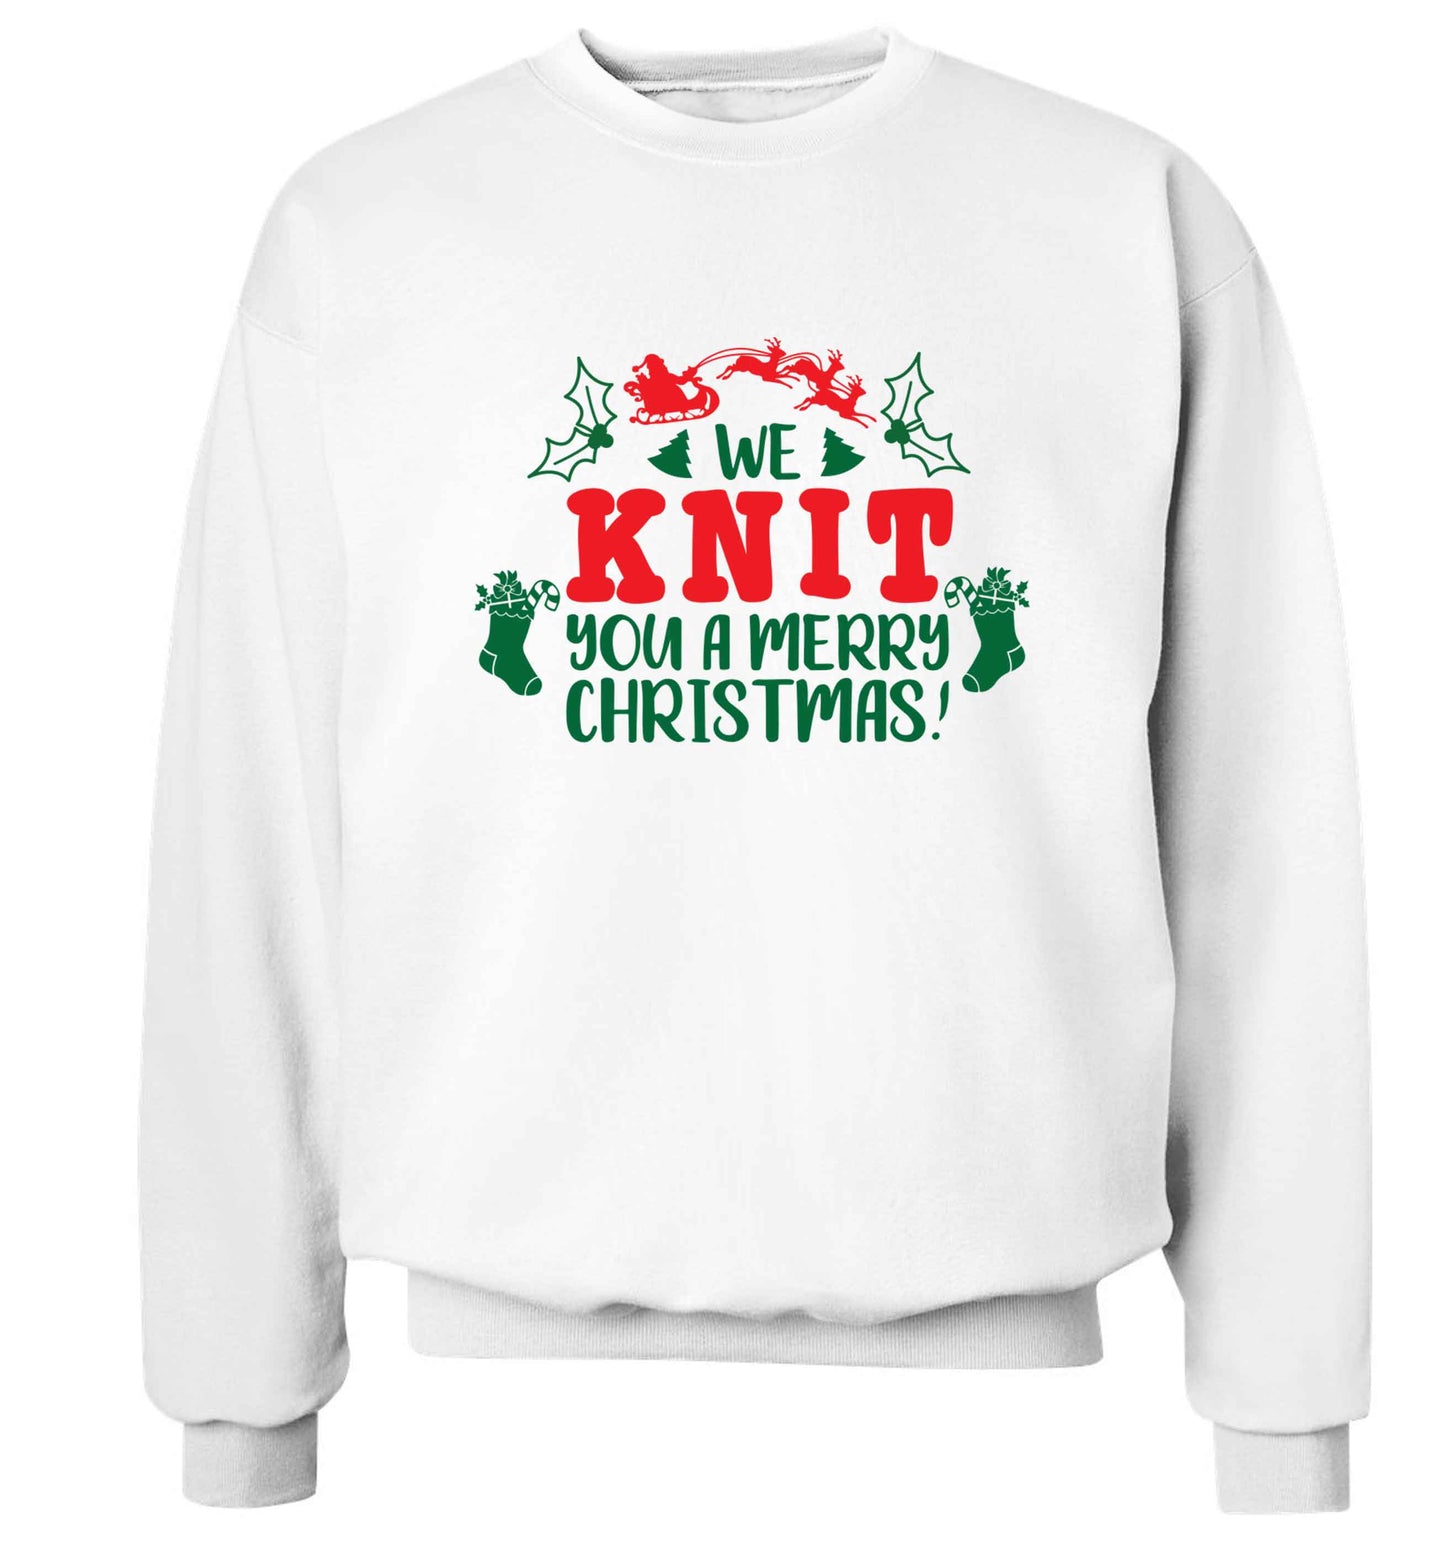 We knit you a merry Christmas Adult's unisex white Sweater 2XL